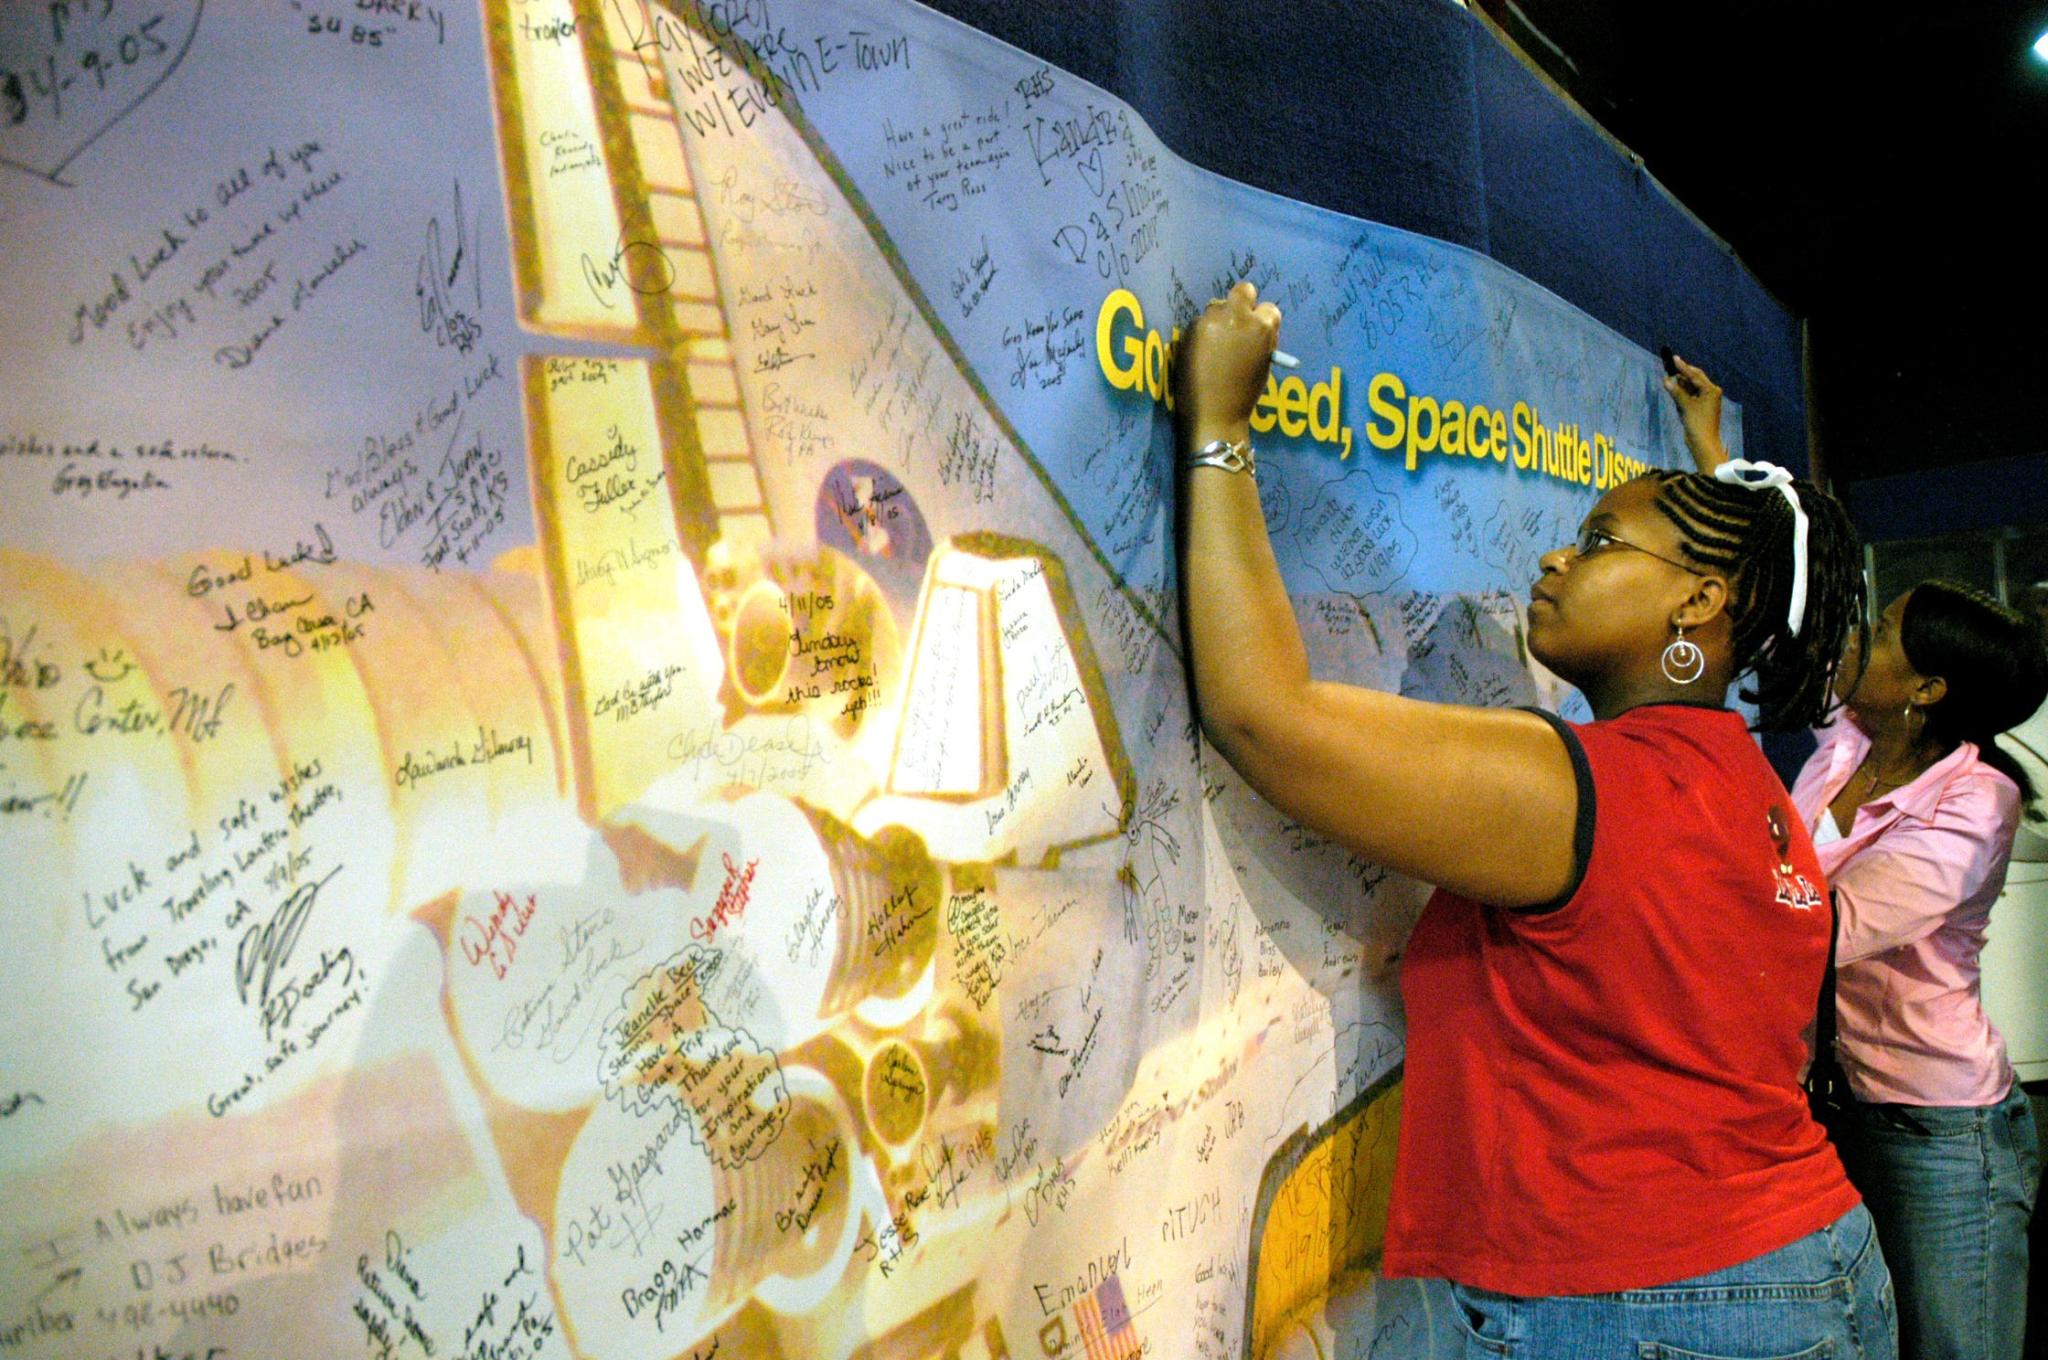 Visitors pen well wishes for the crew of the space shuttle STS-114 mission on a Return to Flight banner hanging in the former StenniSphere museum at Stennis space Center on April 22, 2005